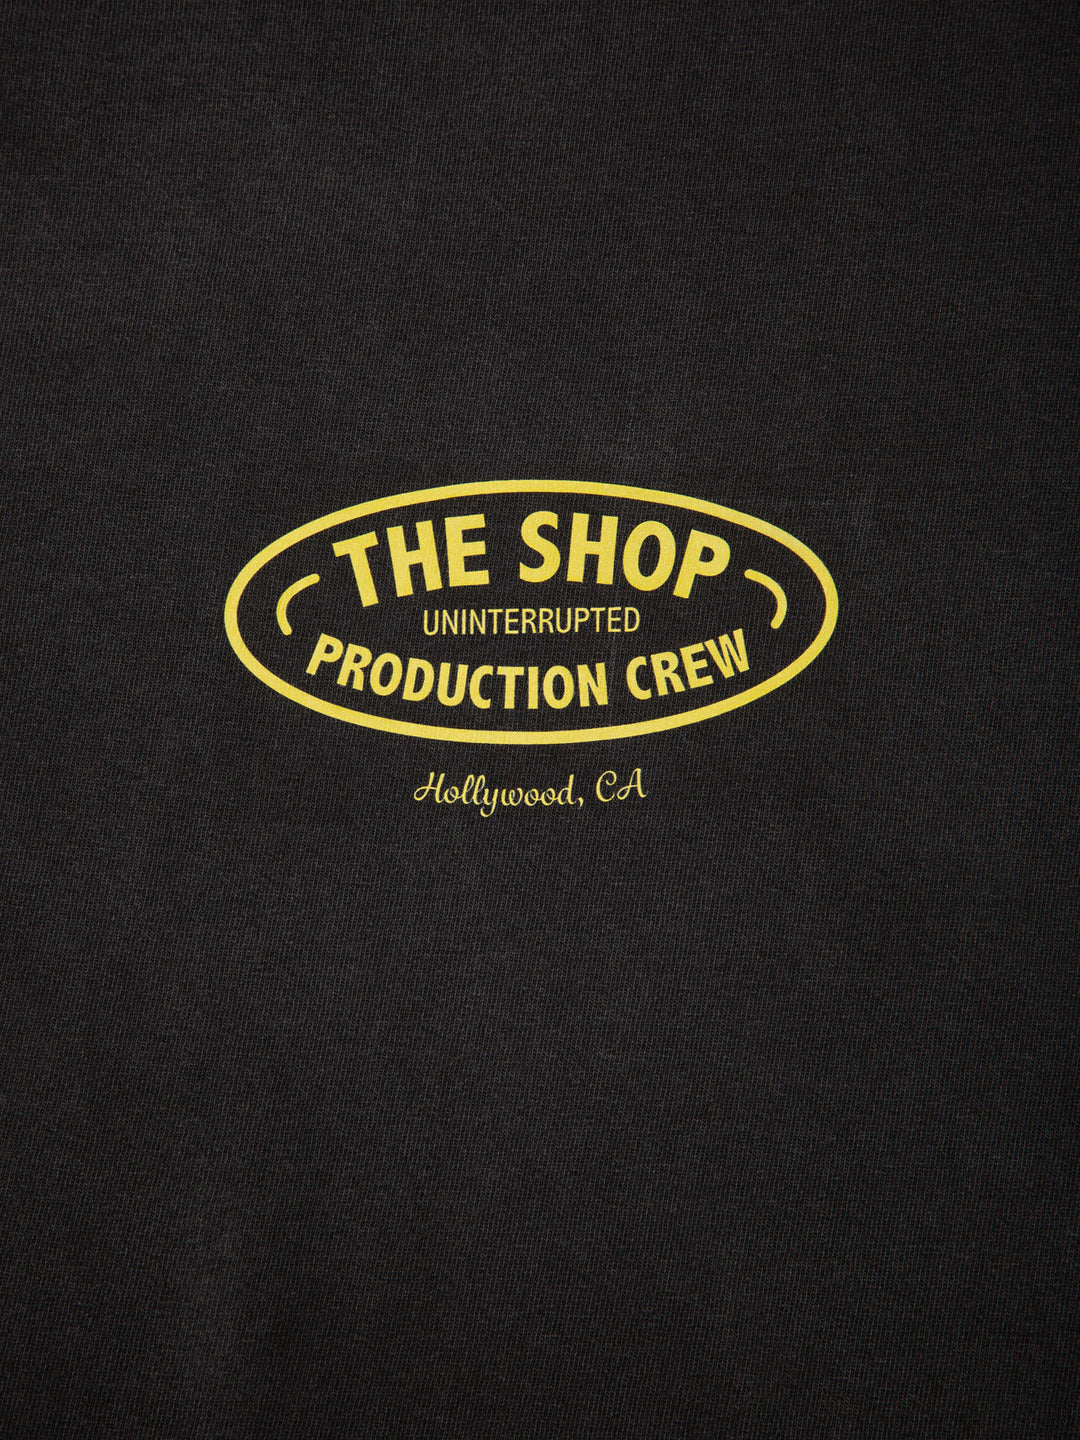 detailed close up with the production crew logo